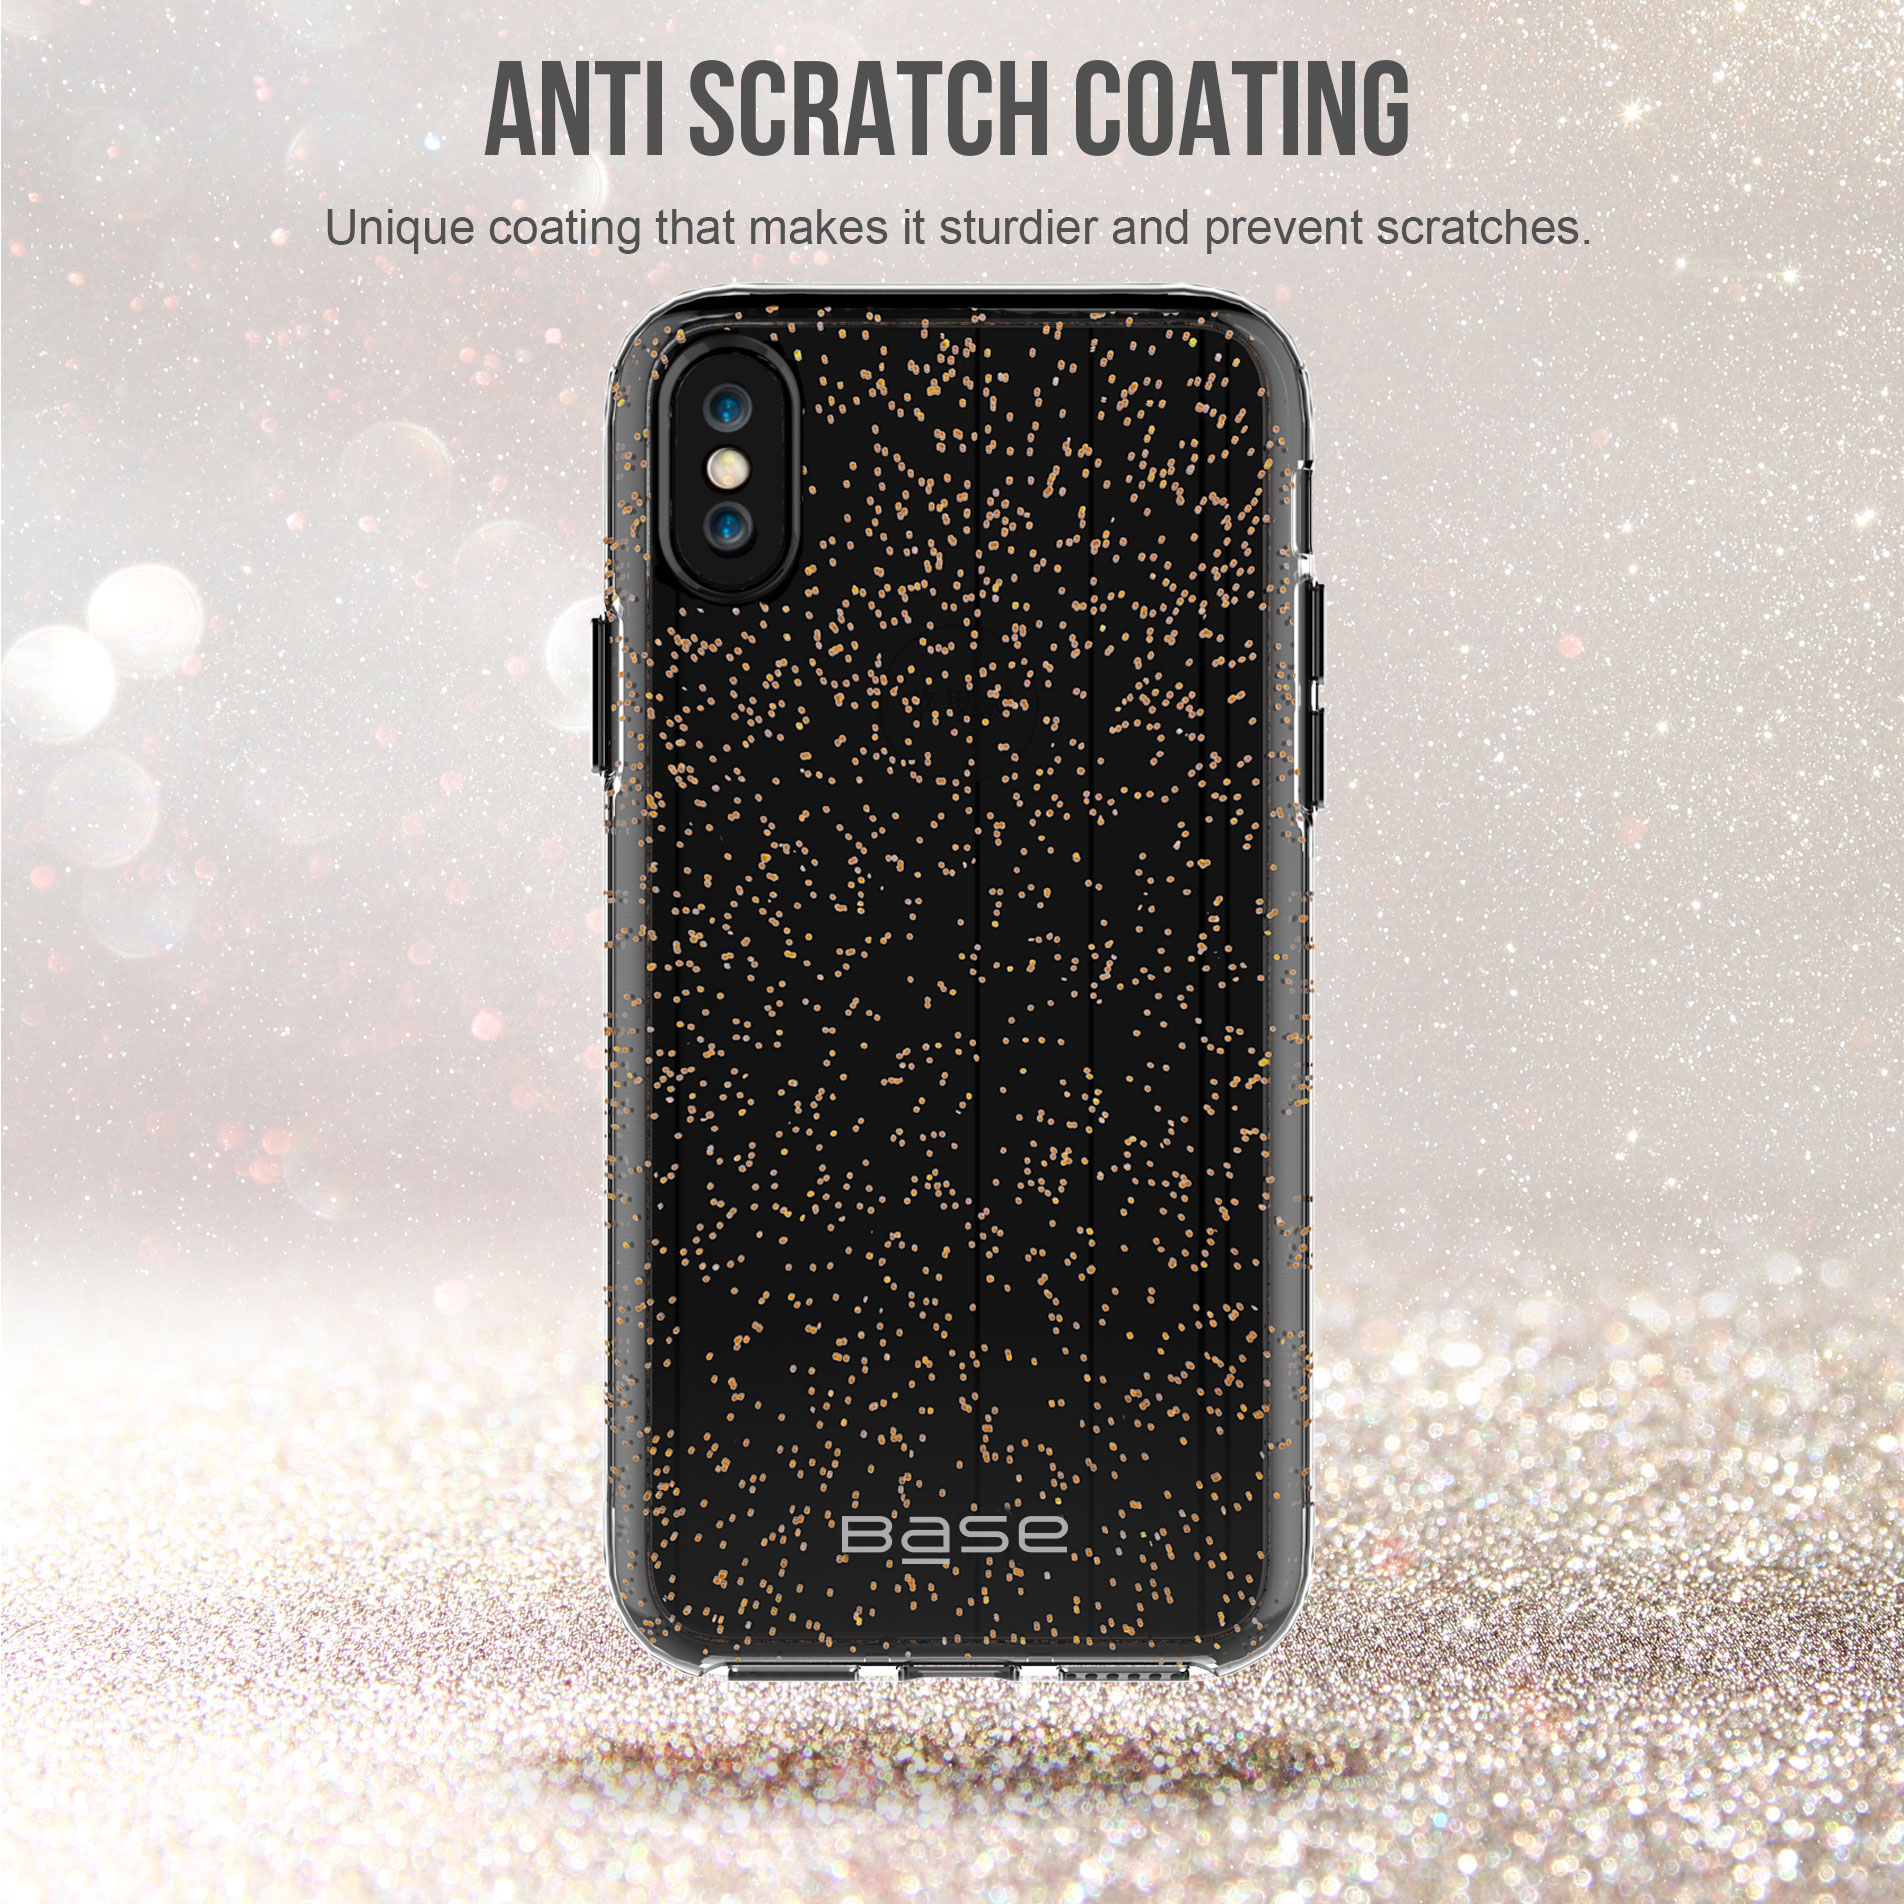 Base Crystal Shield - Reinforced Bumper Protective Case for iPhone X - Gold Glitter